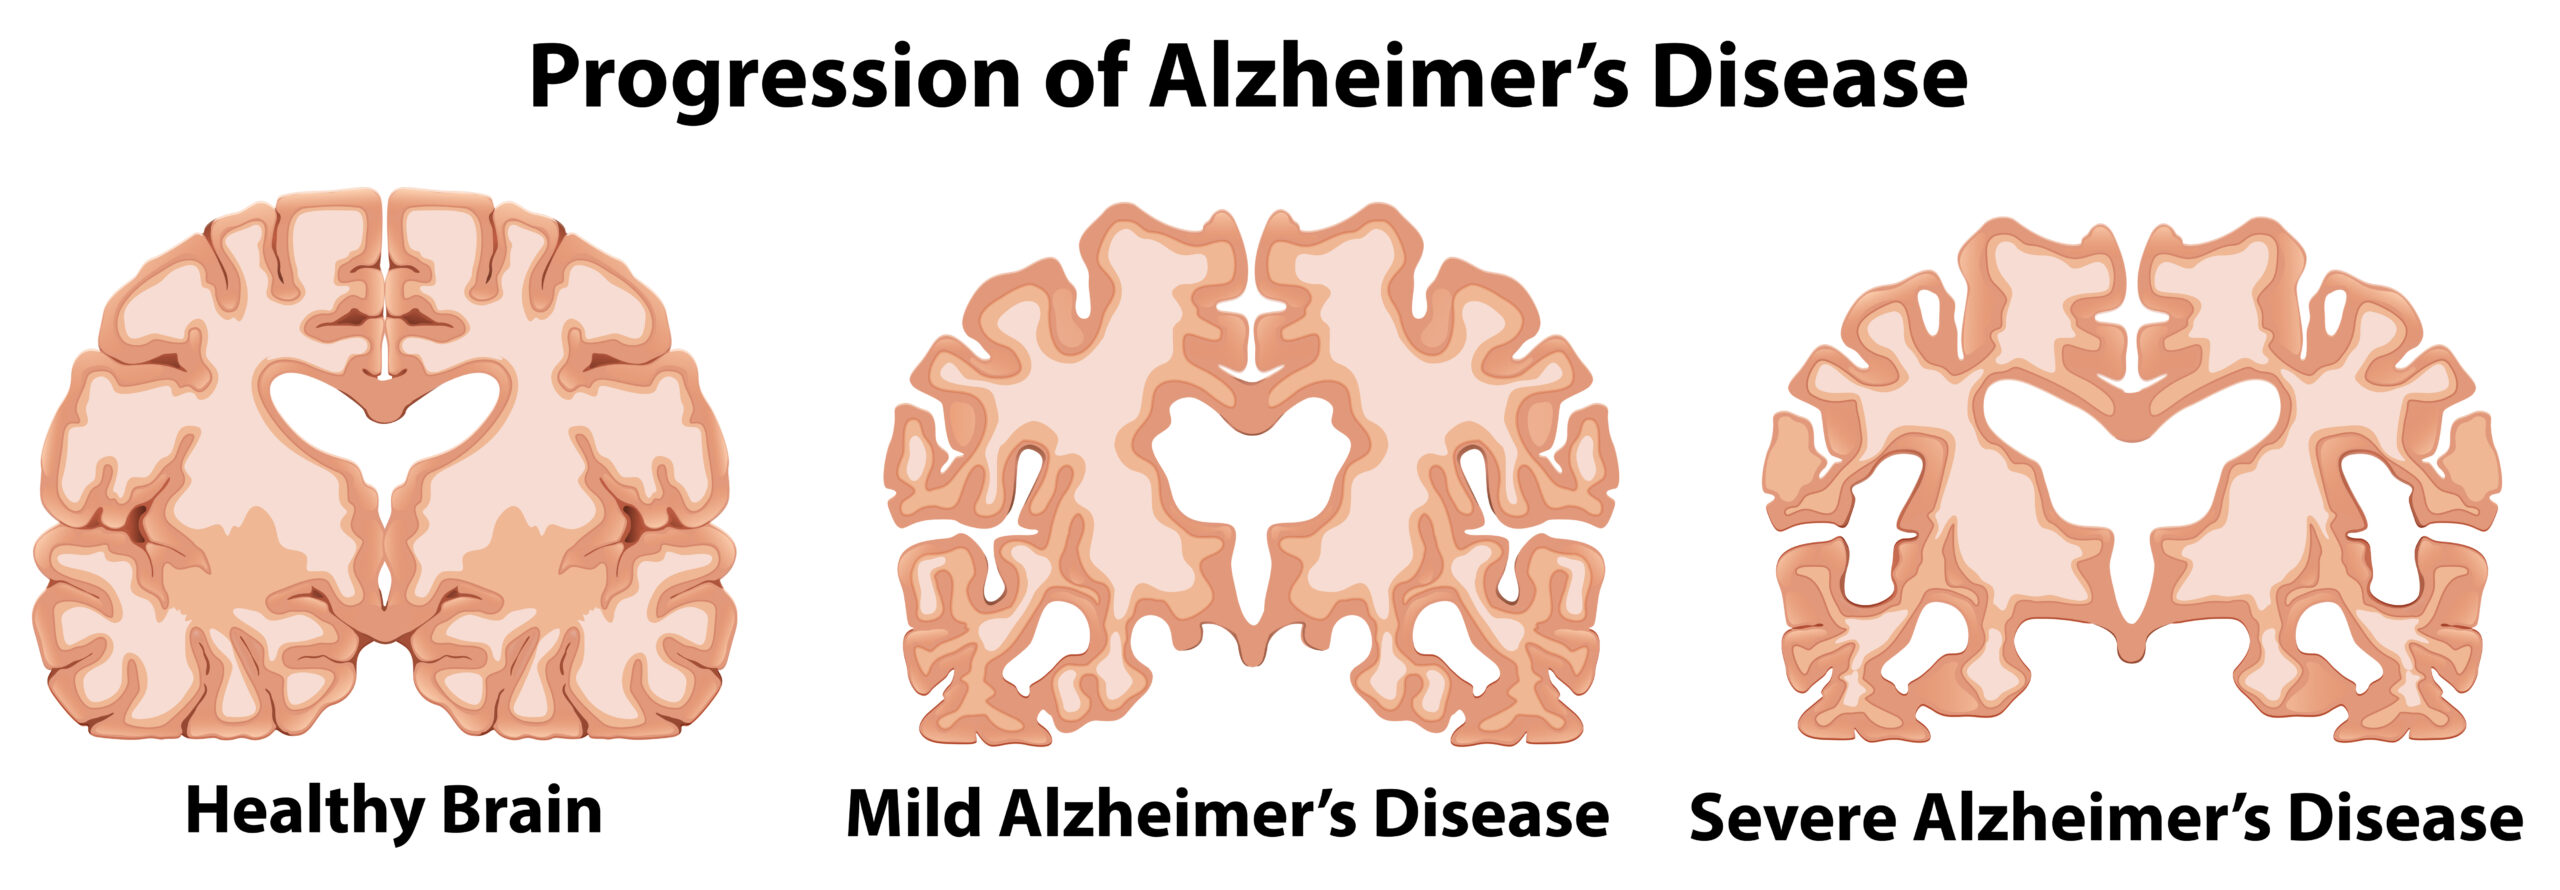 AD-Alzheimer's is a progressive disease, where dementia symptoms gradually worsen over a number of years. In its early stages, memory loss is mild, but with late-stage Alzheimer's, individuals lose the ability to carry on a conversation and respond to their environment.